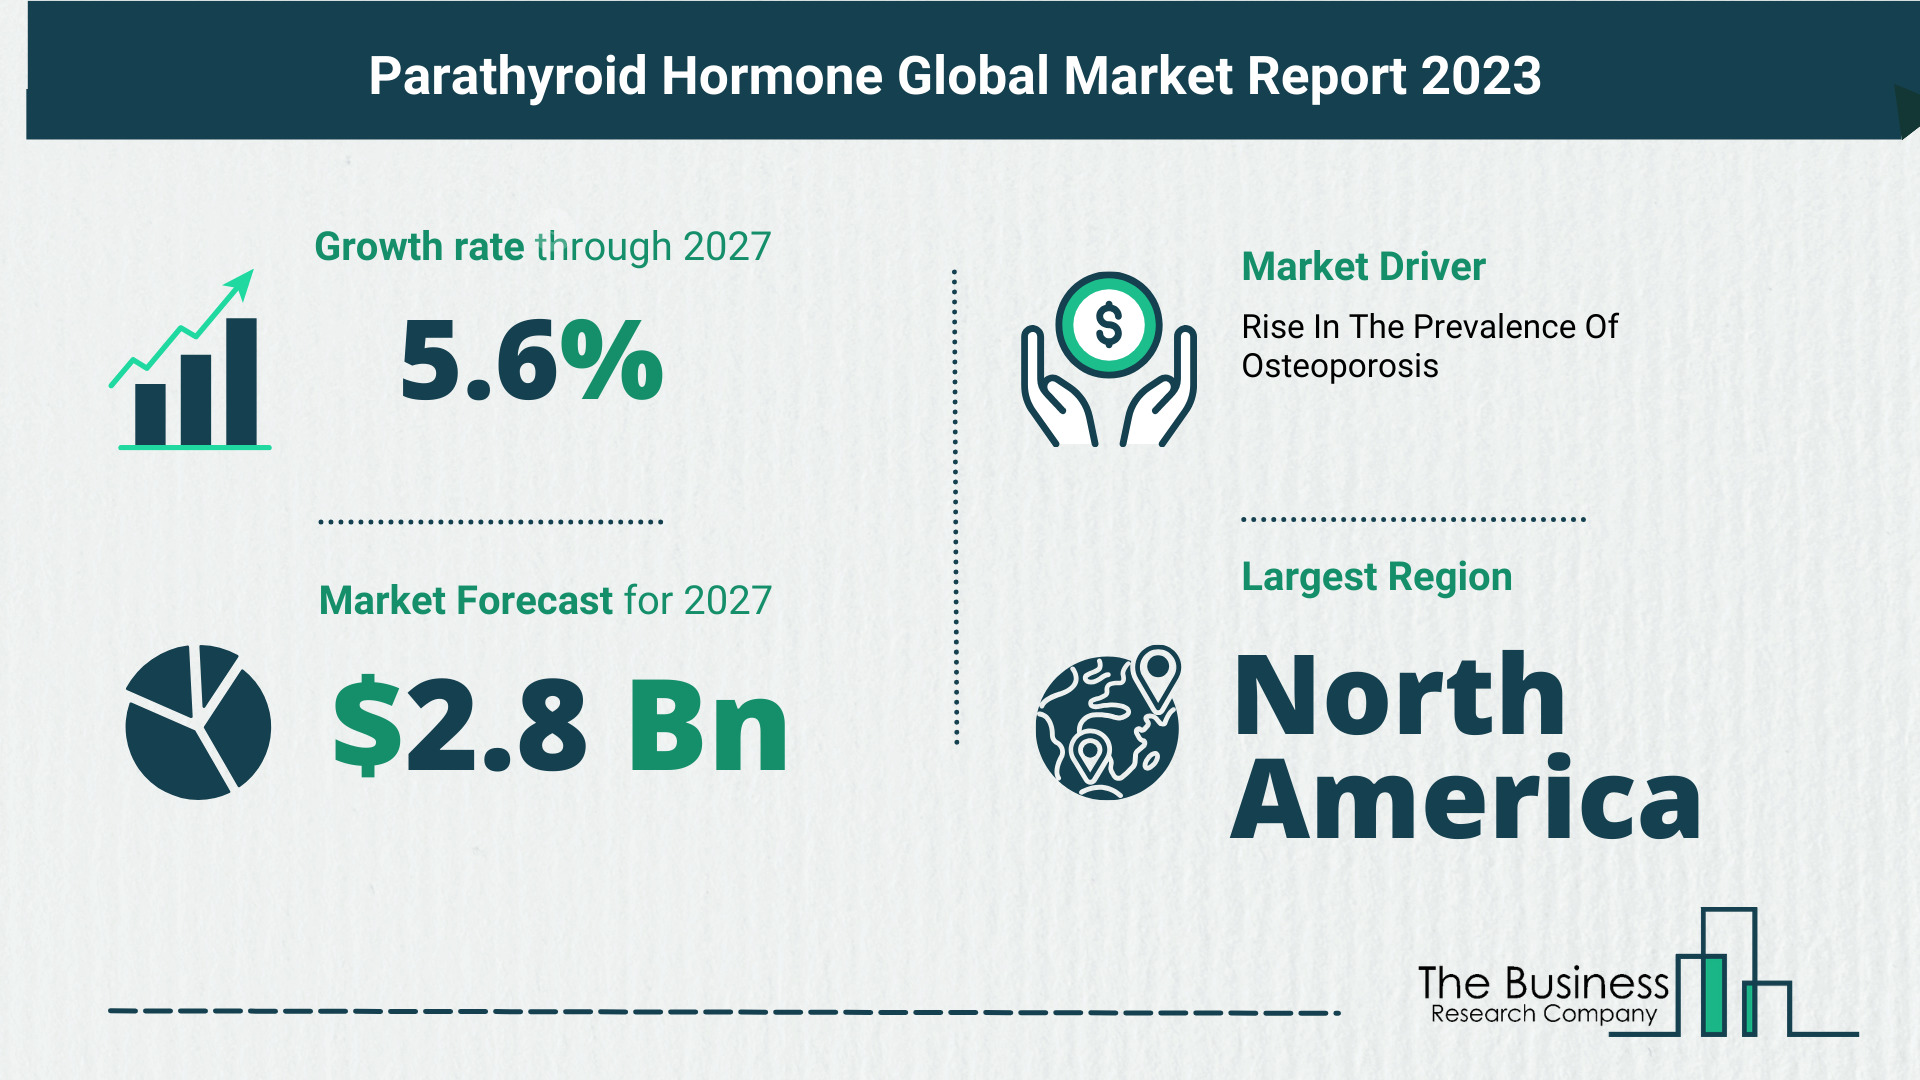 Overview Of The Parathyroid Hormone Market 2023: Size, Drivers, And Trends